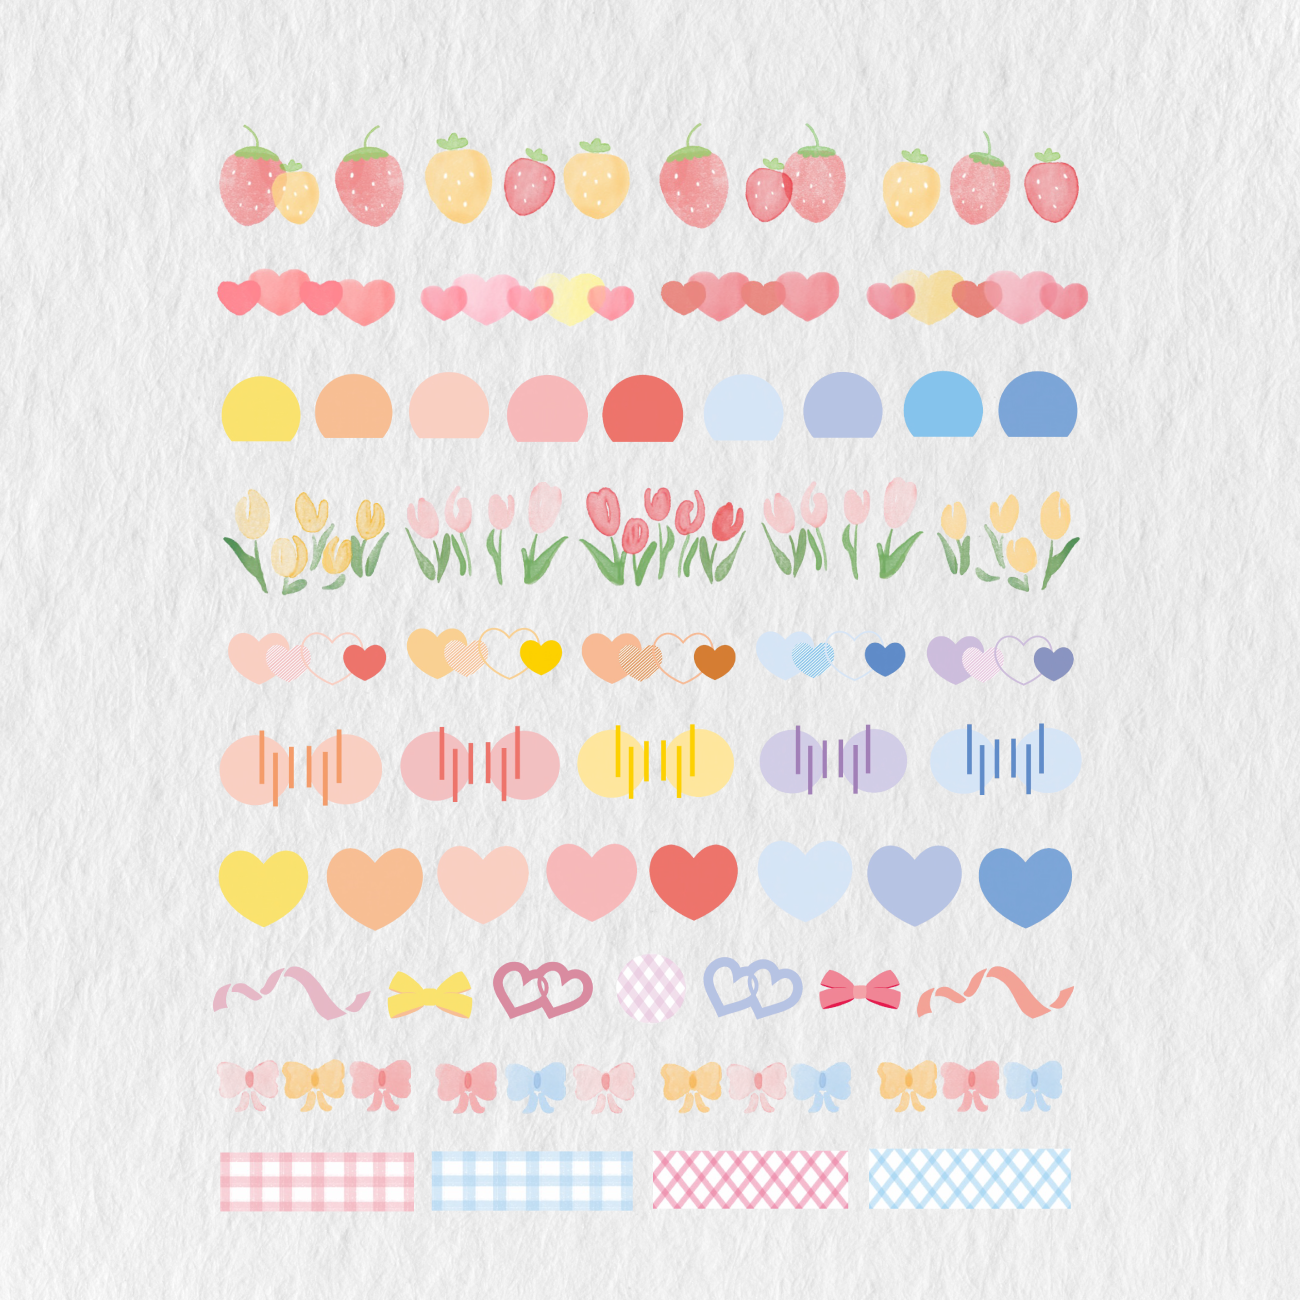 166 Cute Doodle Digital Stickers Set - Stationery Pal